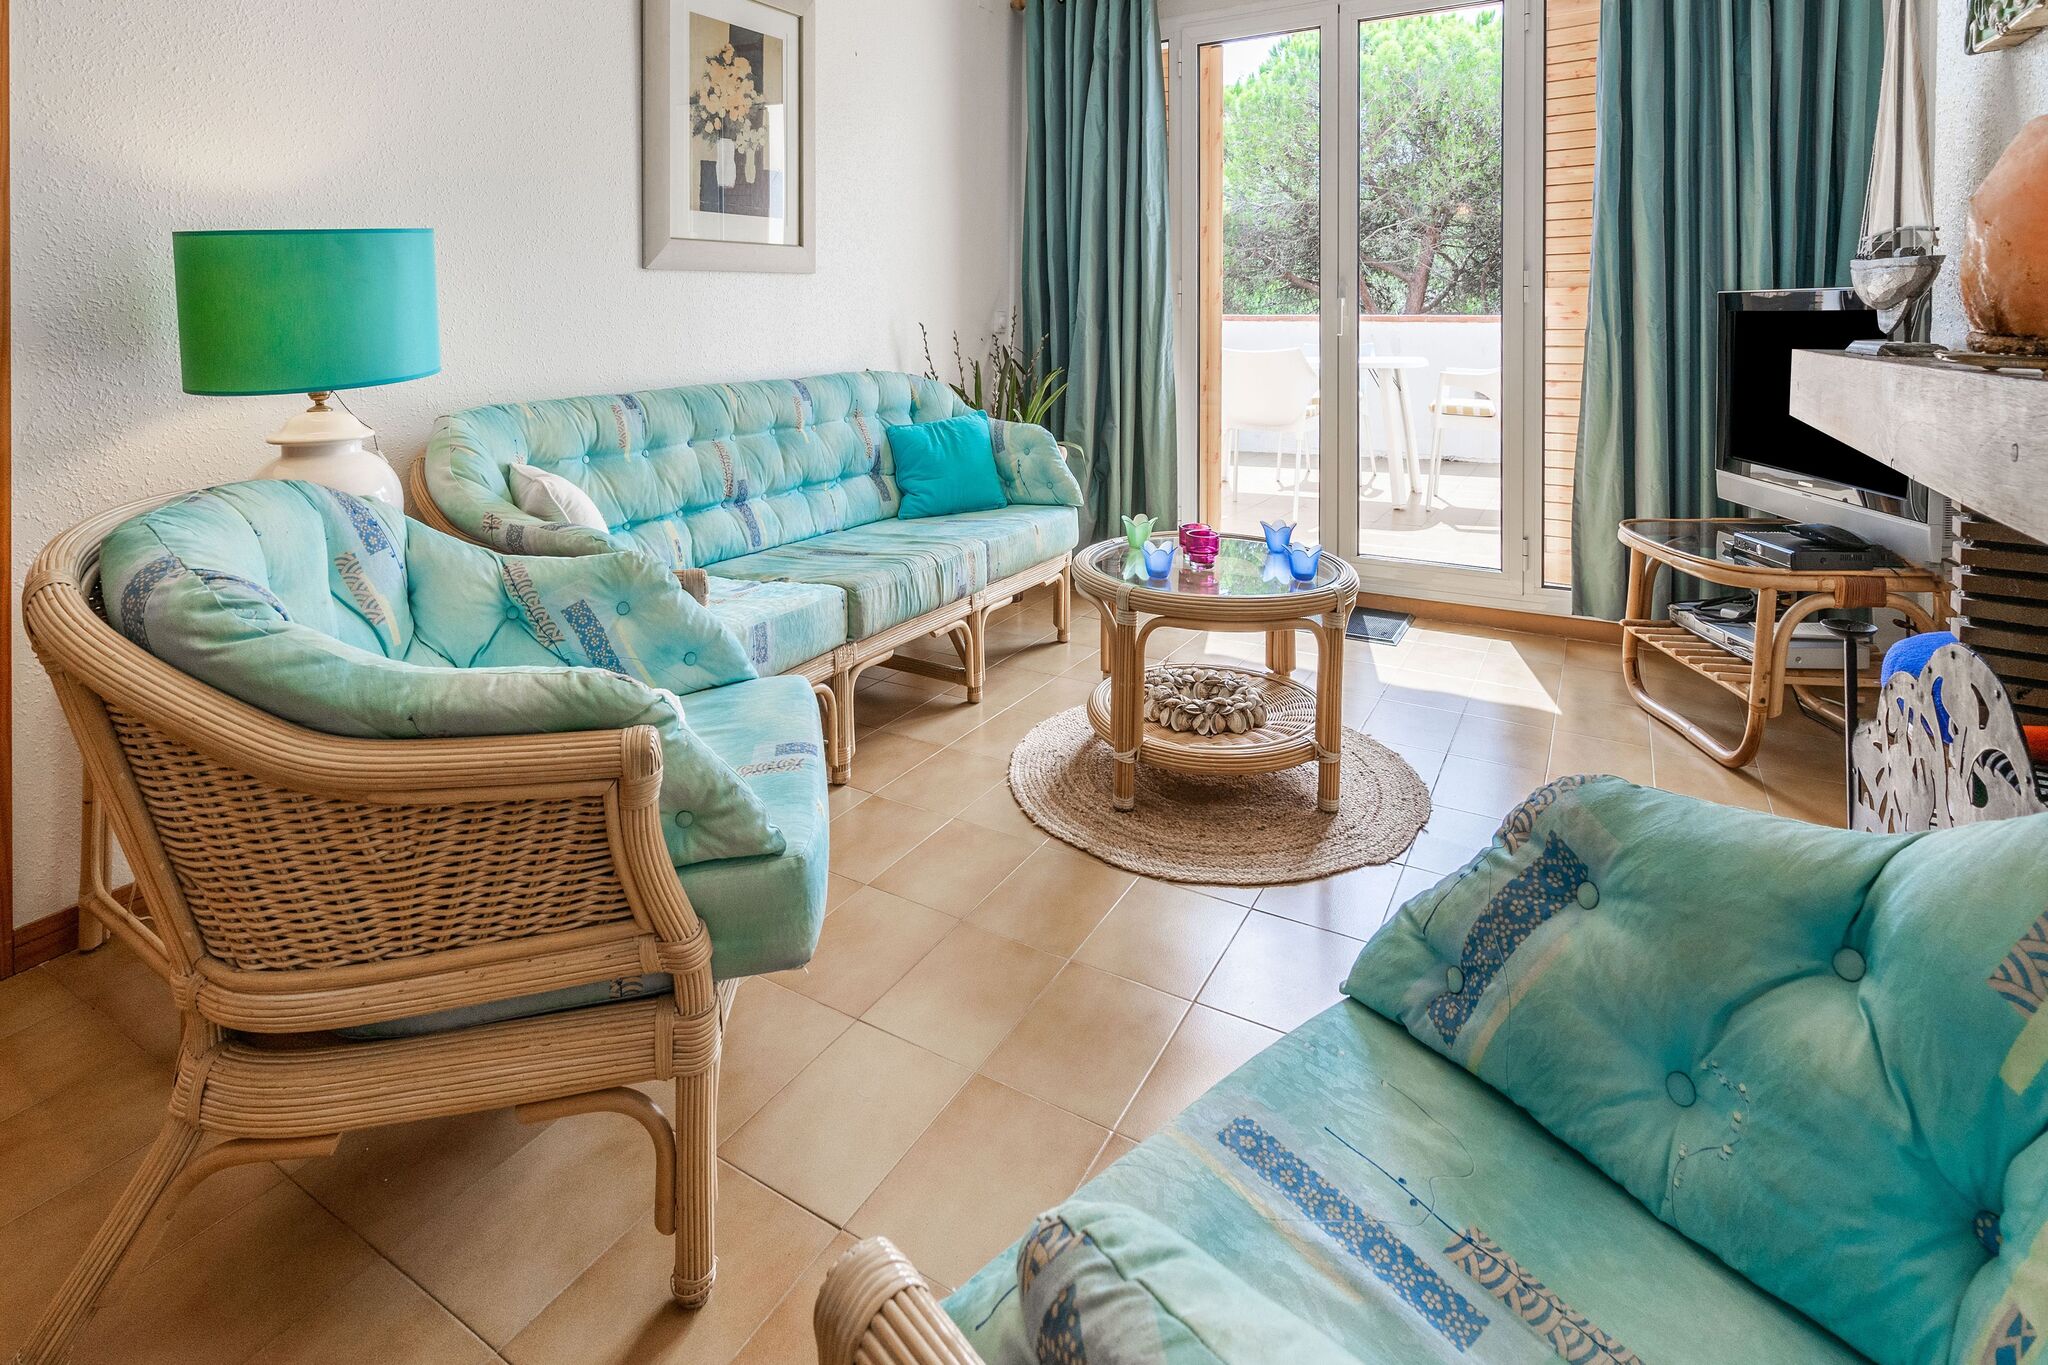 Vintage Holiday Home in Platja d'Aro with Swimming Pool